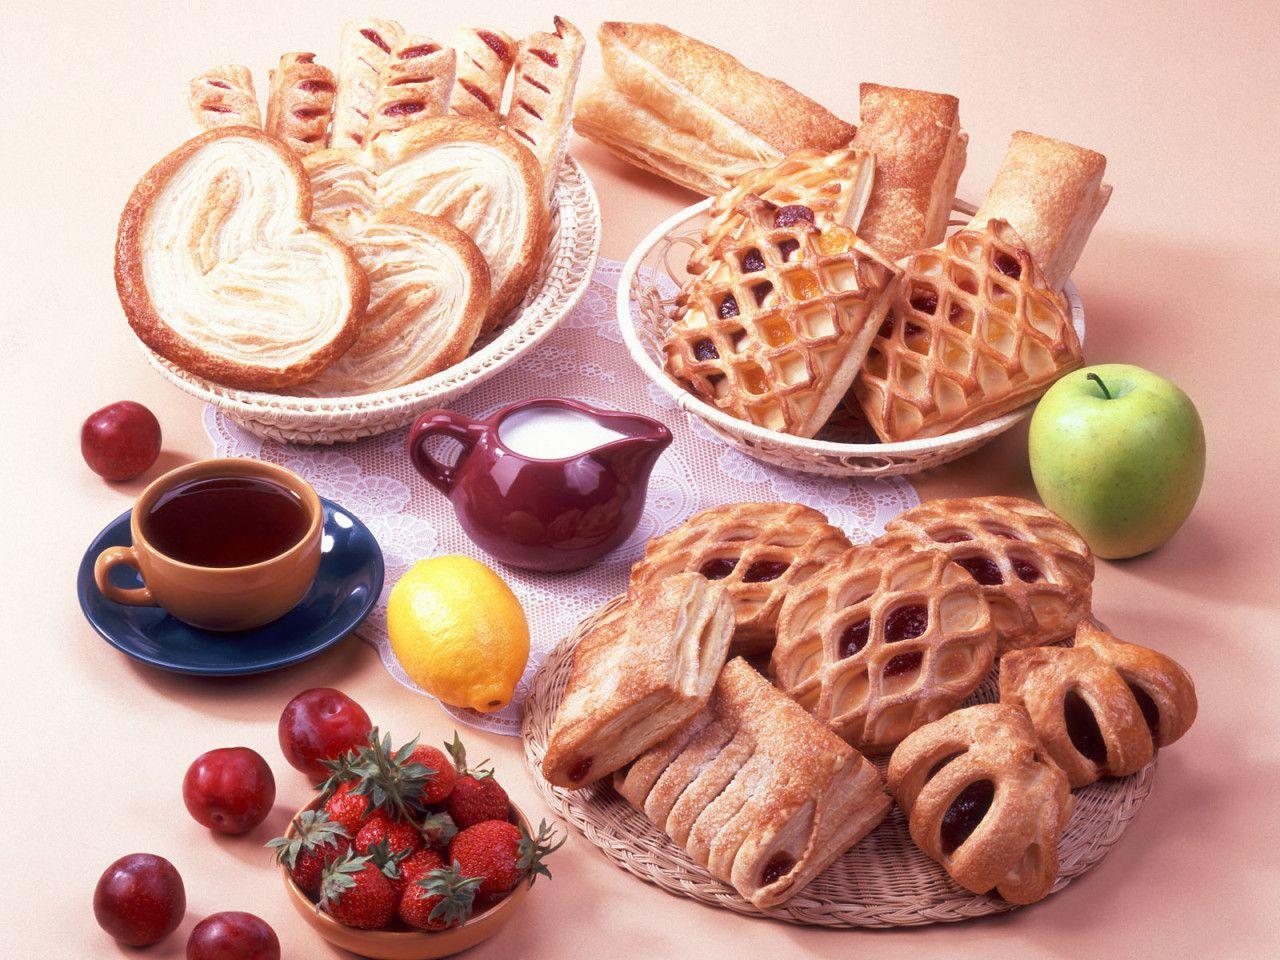 Wallpaper Food Sweets Pastry